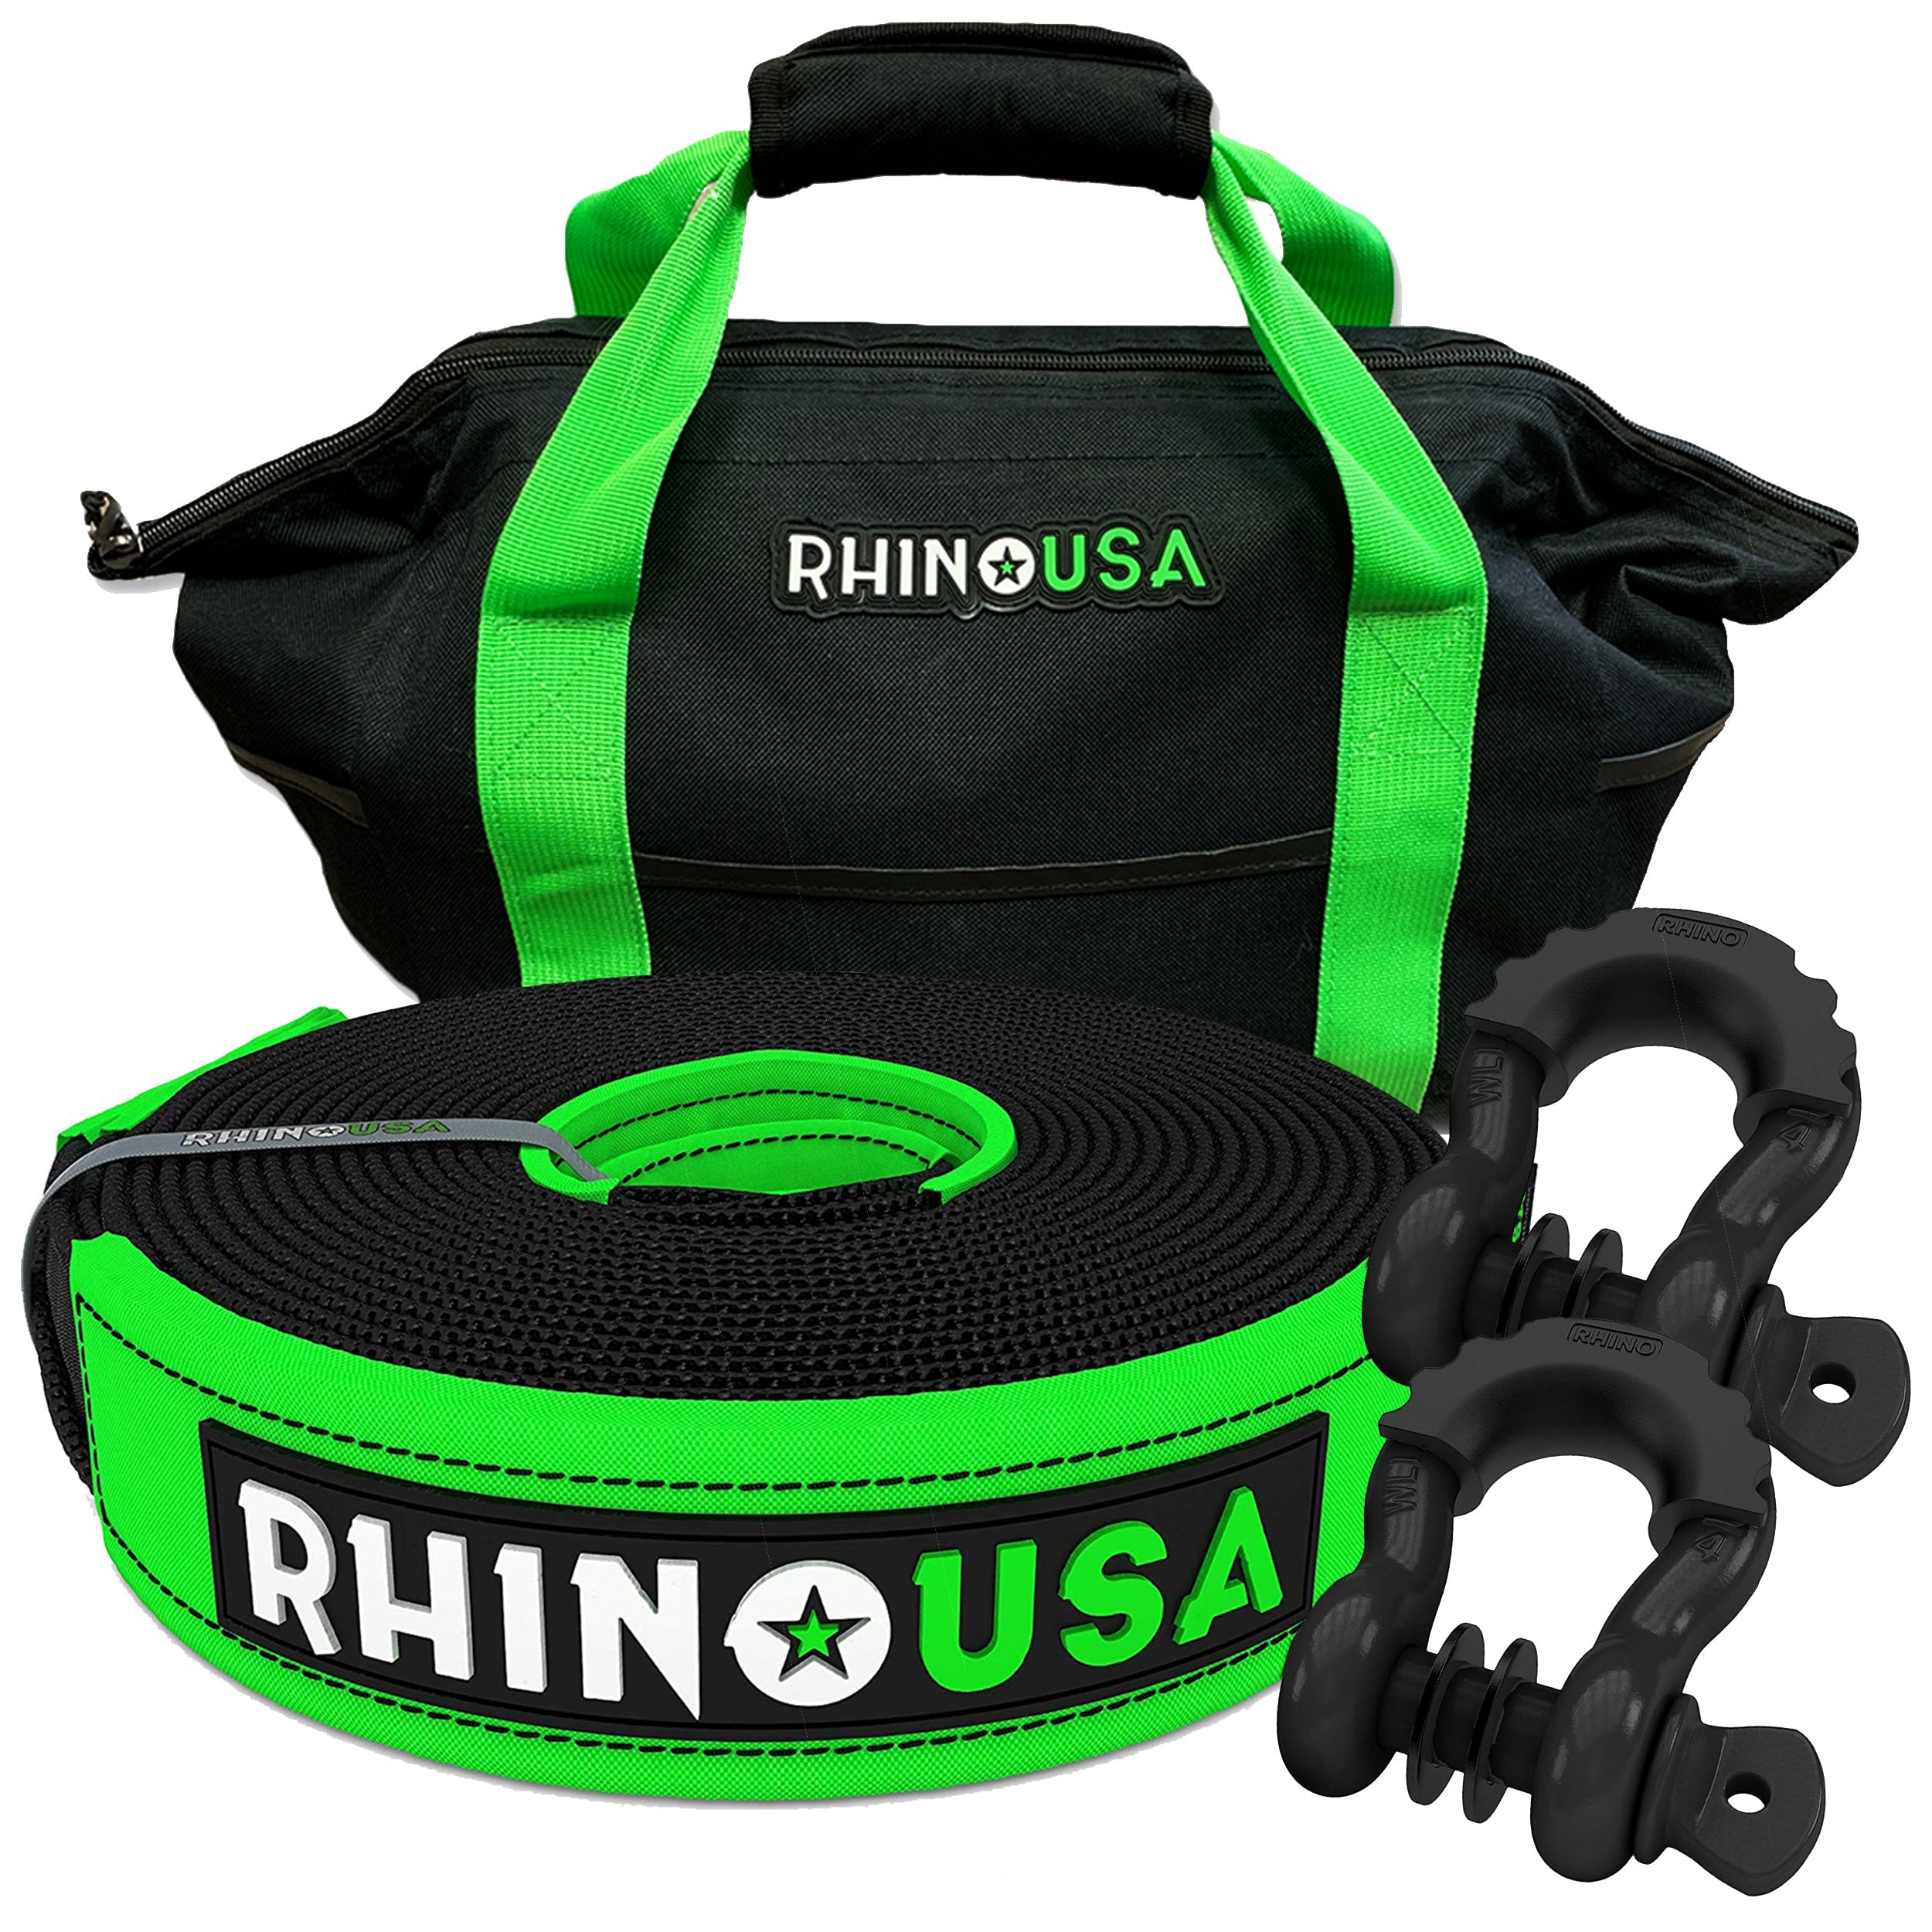 Rhino USA 20' Tow Strap & D-Ring Shackle Set Combo